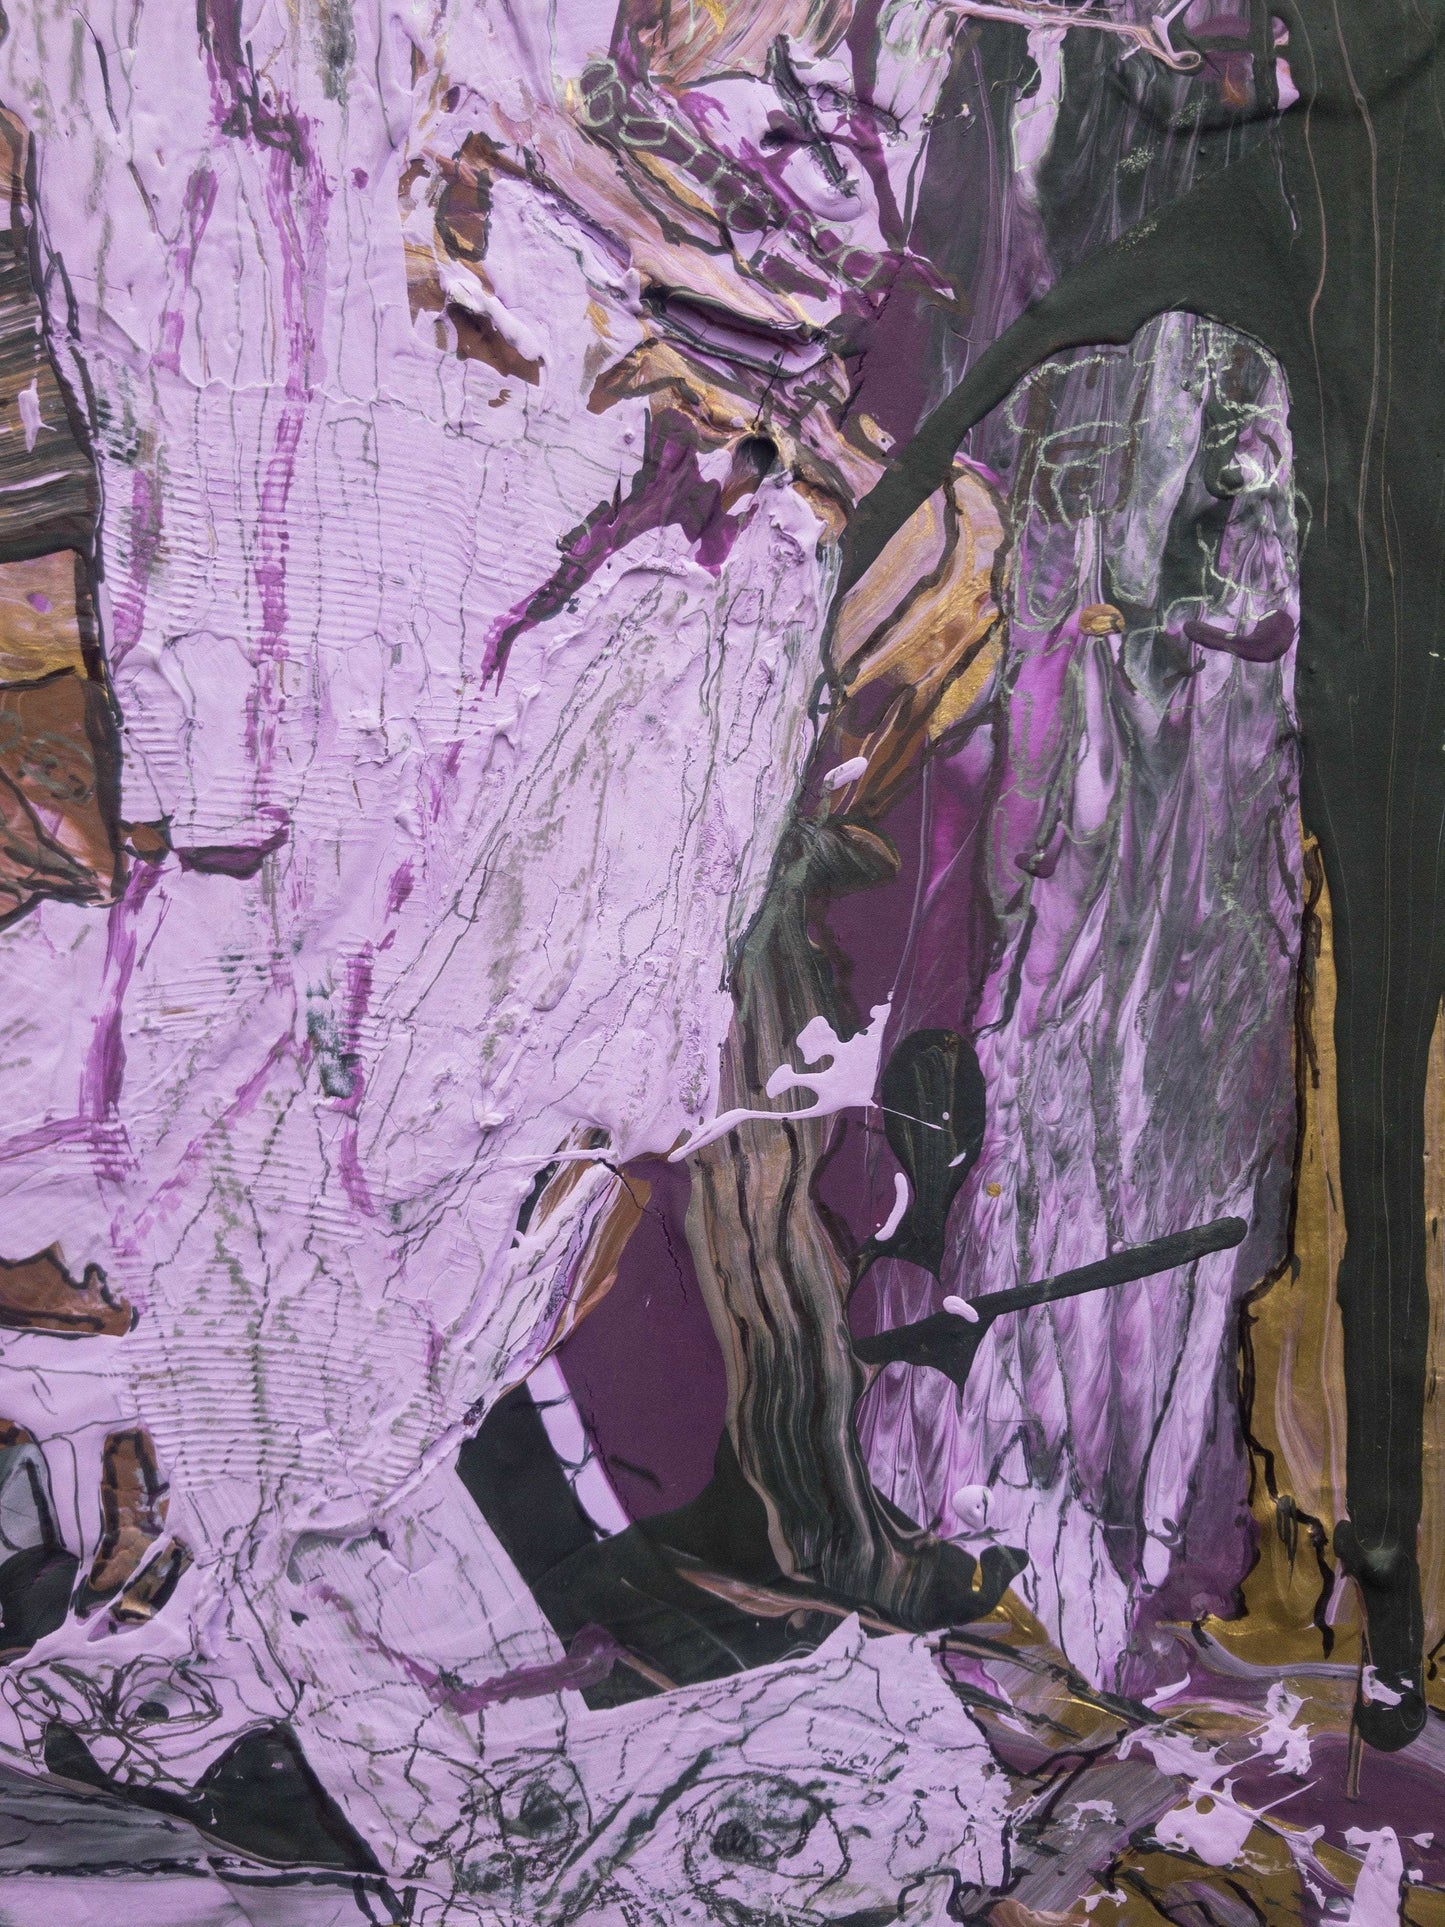 Misery - Medium Size, Purple And Black, With Gold Accents Painting, Textured Abstract Design by Art With Evie